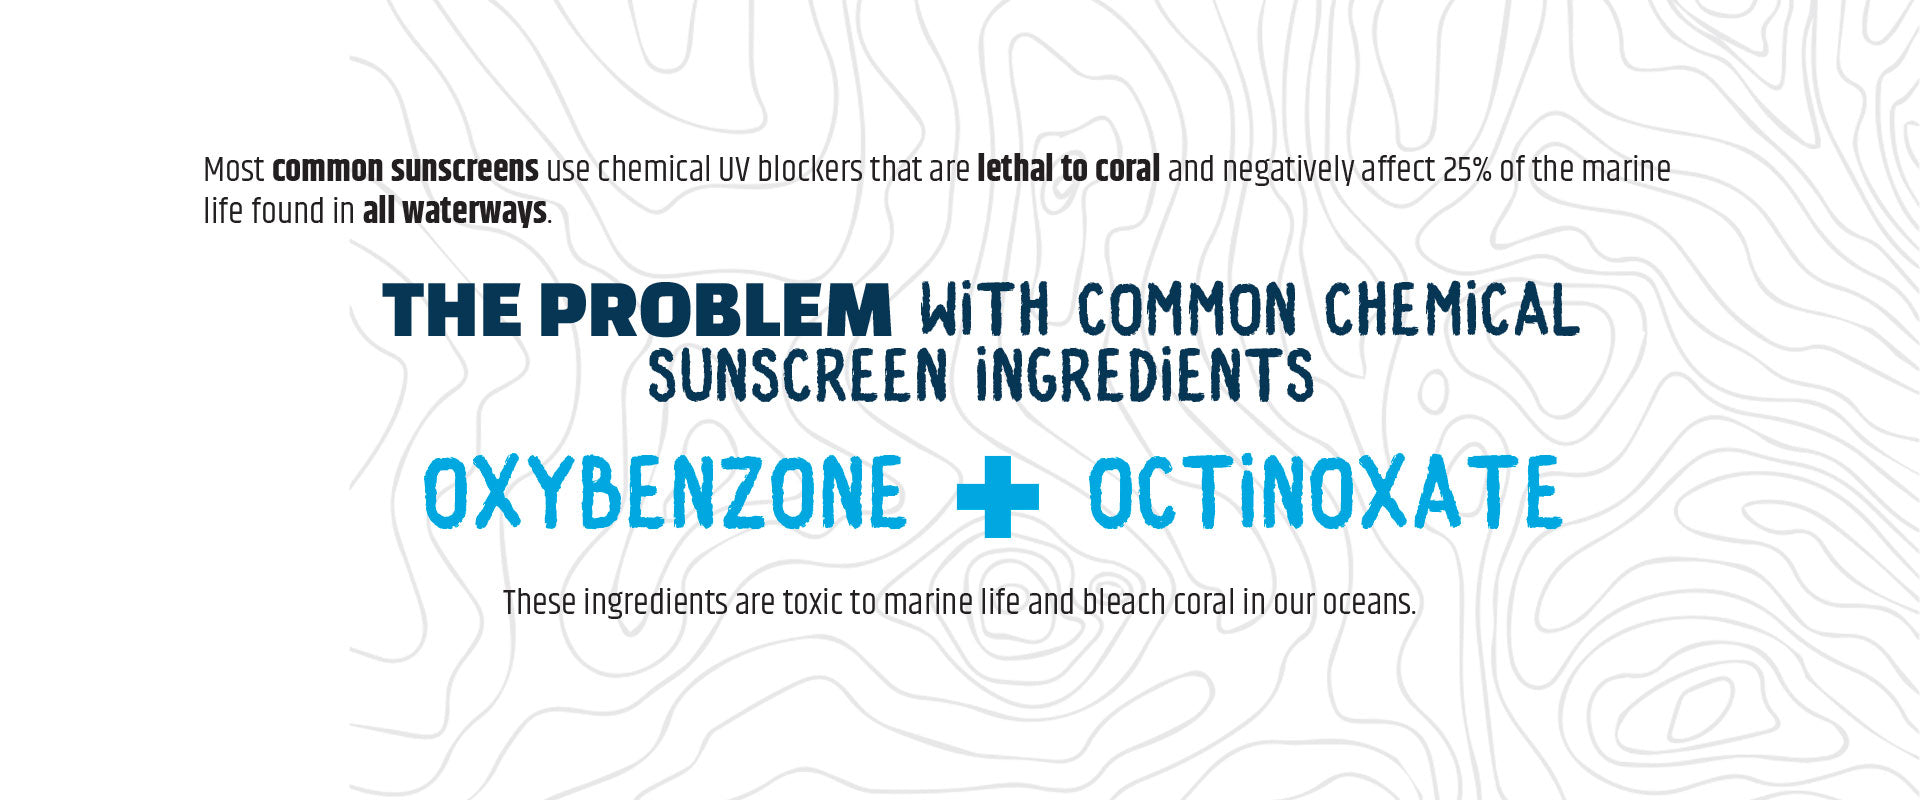 Most common sunscreens use chemical uv blockers that are lethal to coral and negatively affect 25% of the marine life found in all waterways.